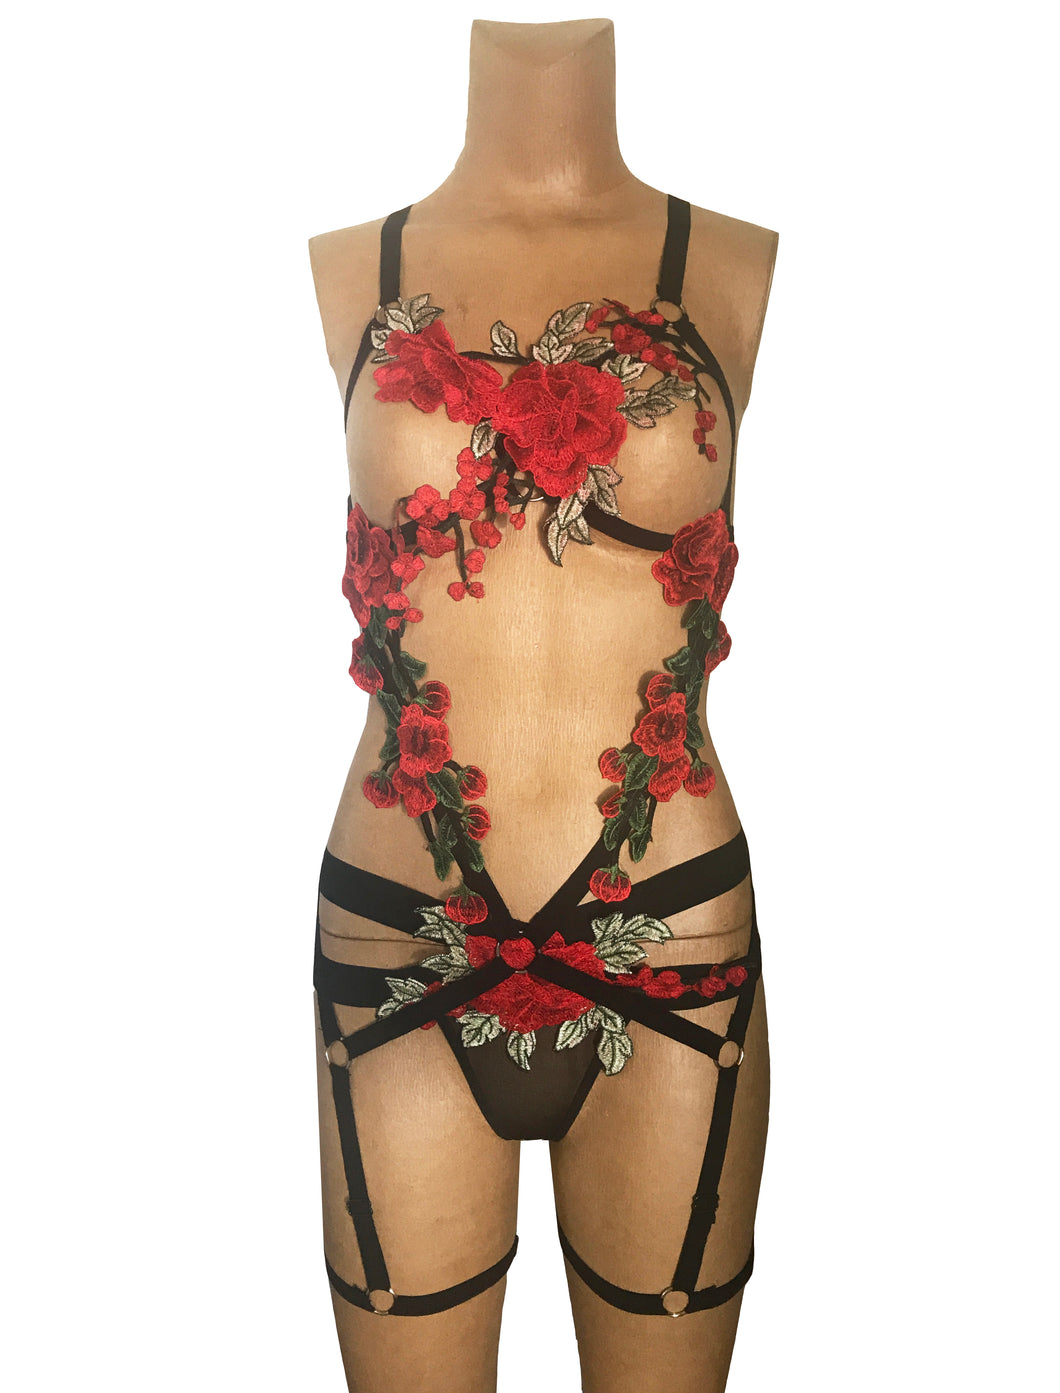 Full Body Red Rose Floral Body Harness and Thong set